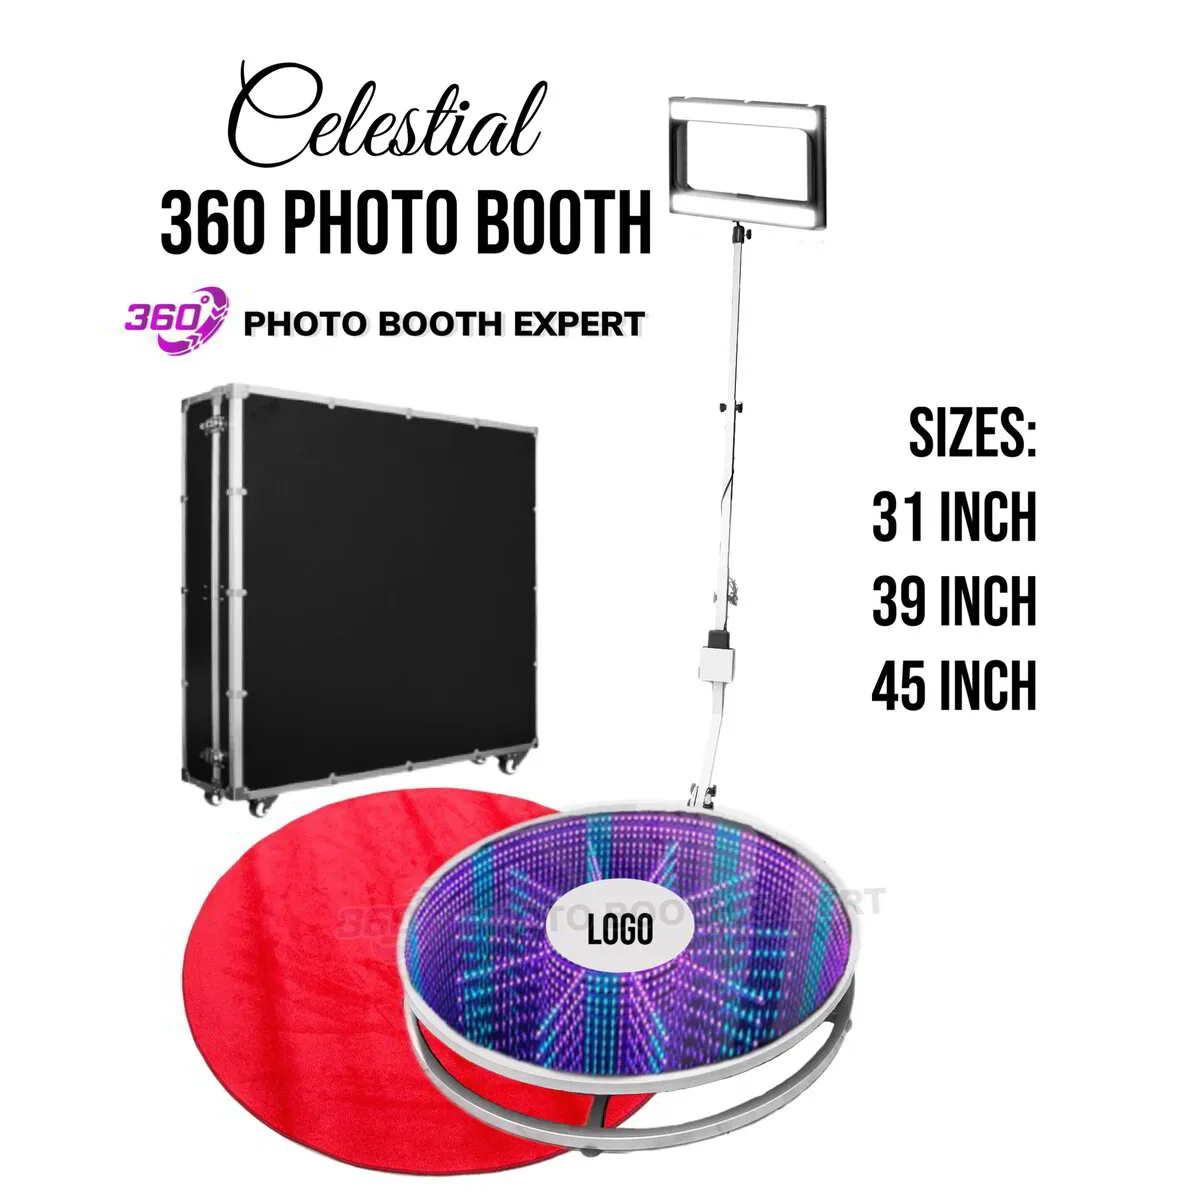 360 Celestial Photo Booth